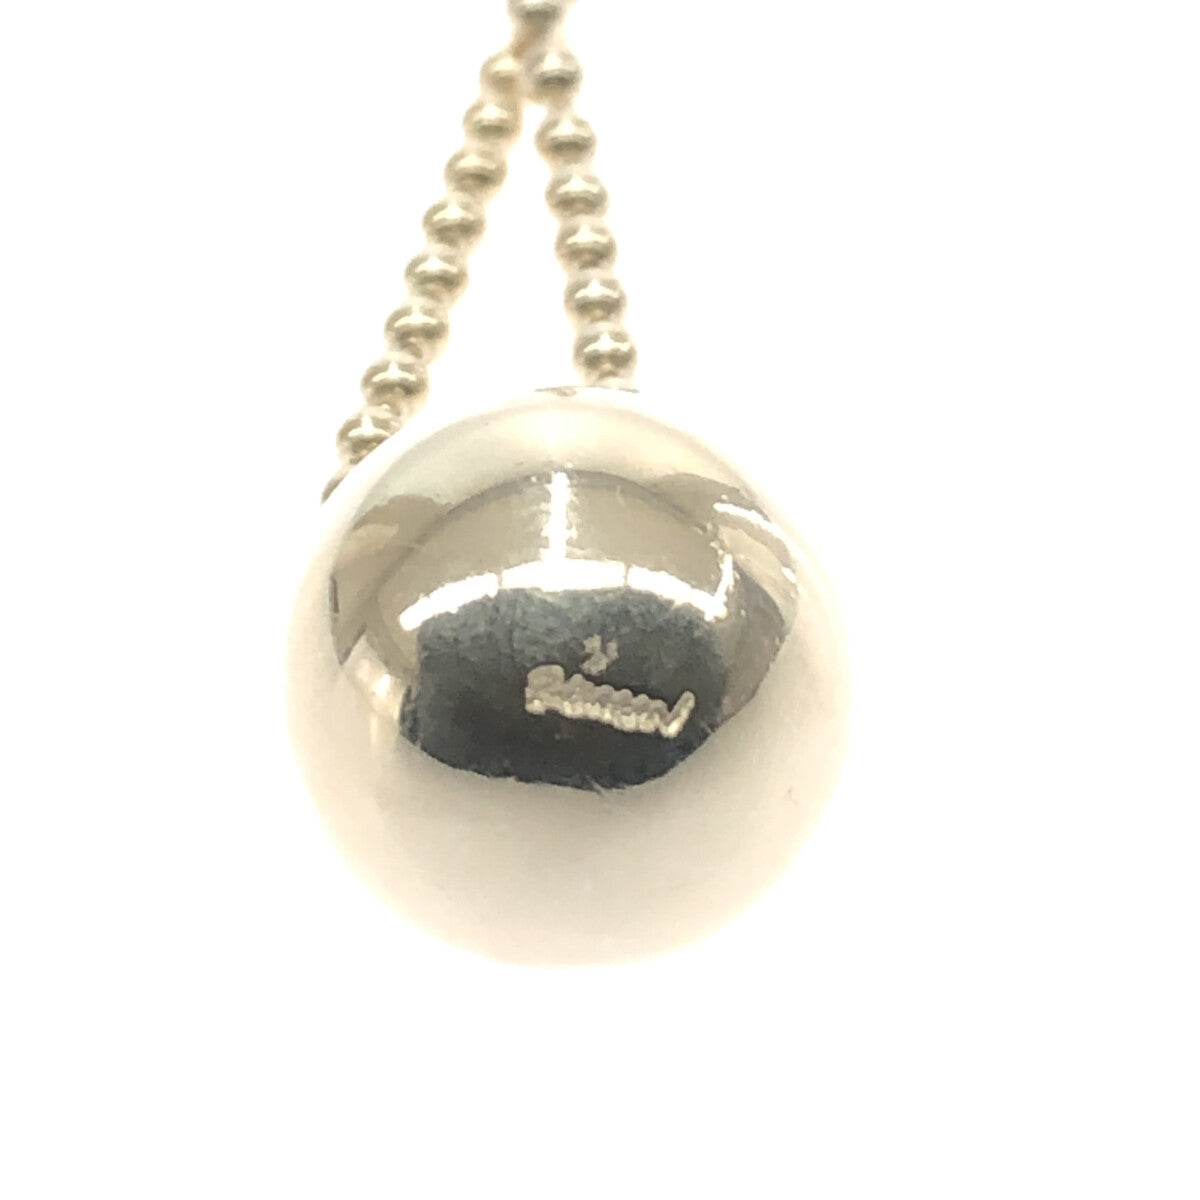 R.ALAGAN / ララガン | BALL NECKLACE Sterling Silver / チェーン ボールネックレス | Free |